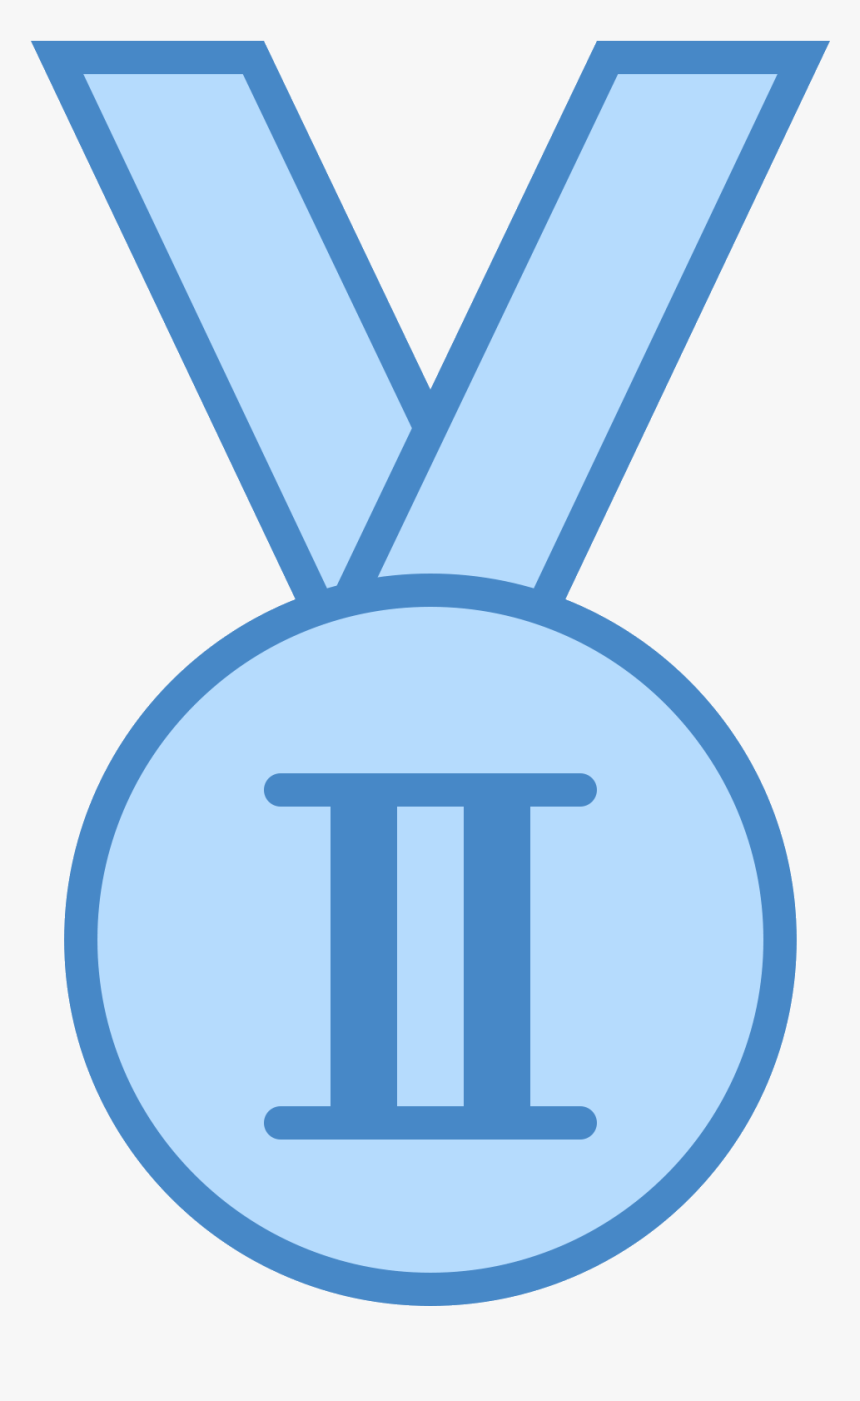 This Icon Represents A Medal For Silver In The Olympics - Синяя Иконка Место Png, Transparent Png, Free Download